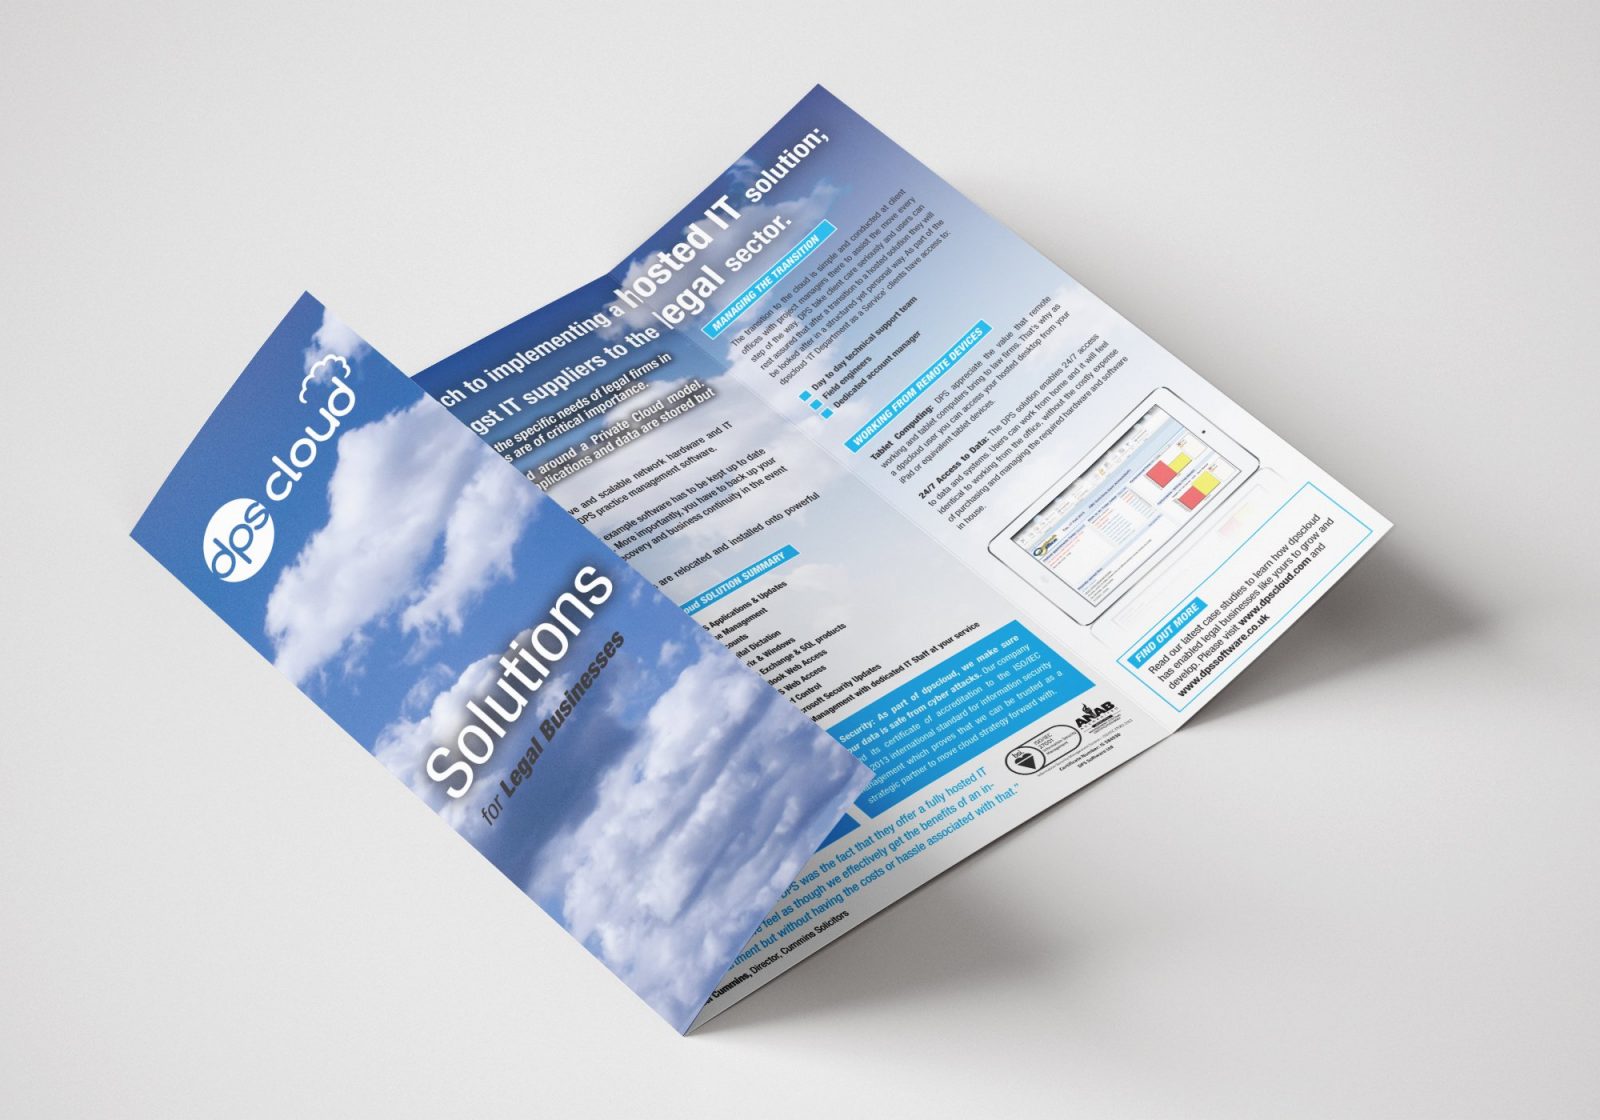 A gate folded brochure for DPS Software showing the front and inside pages